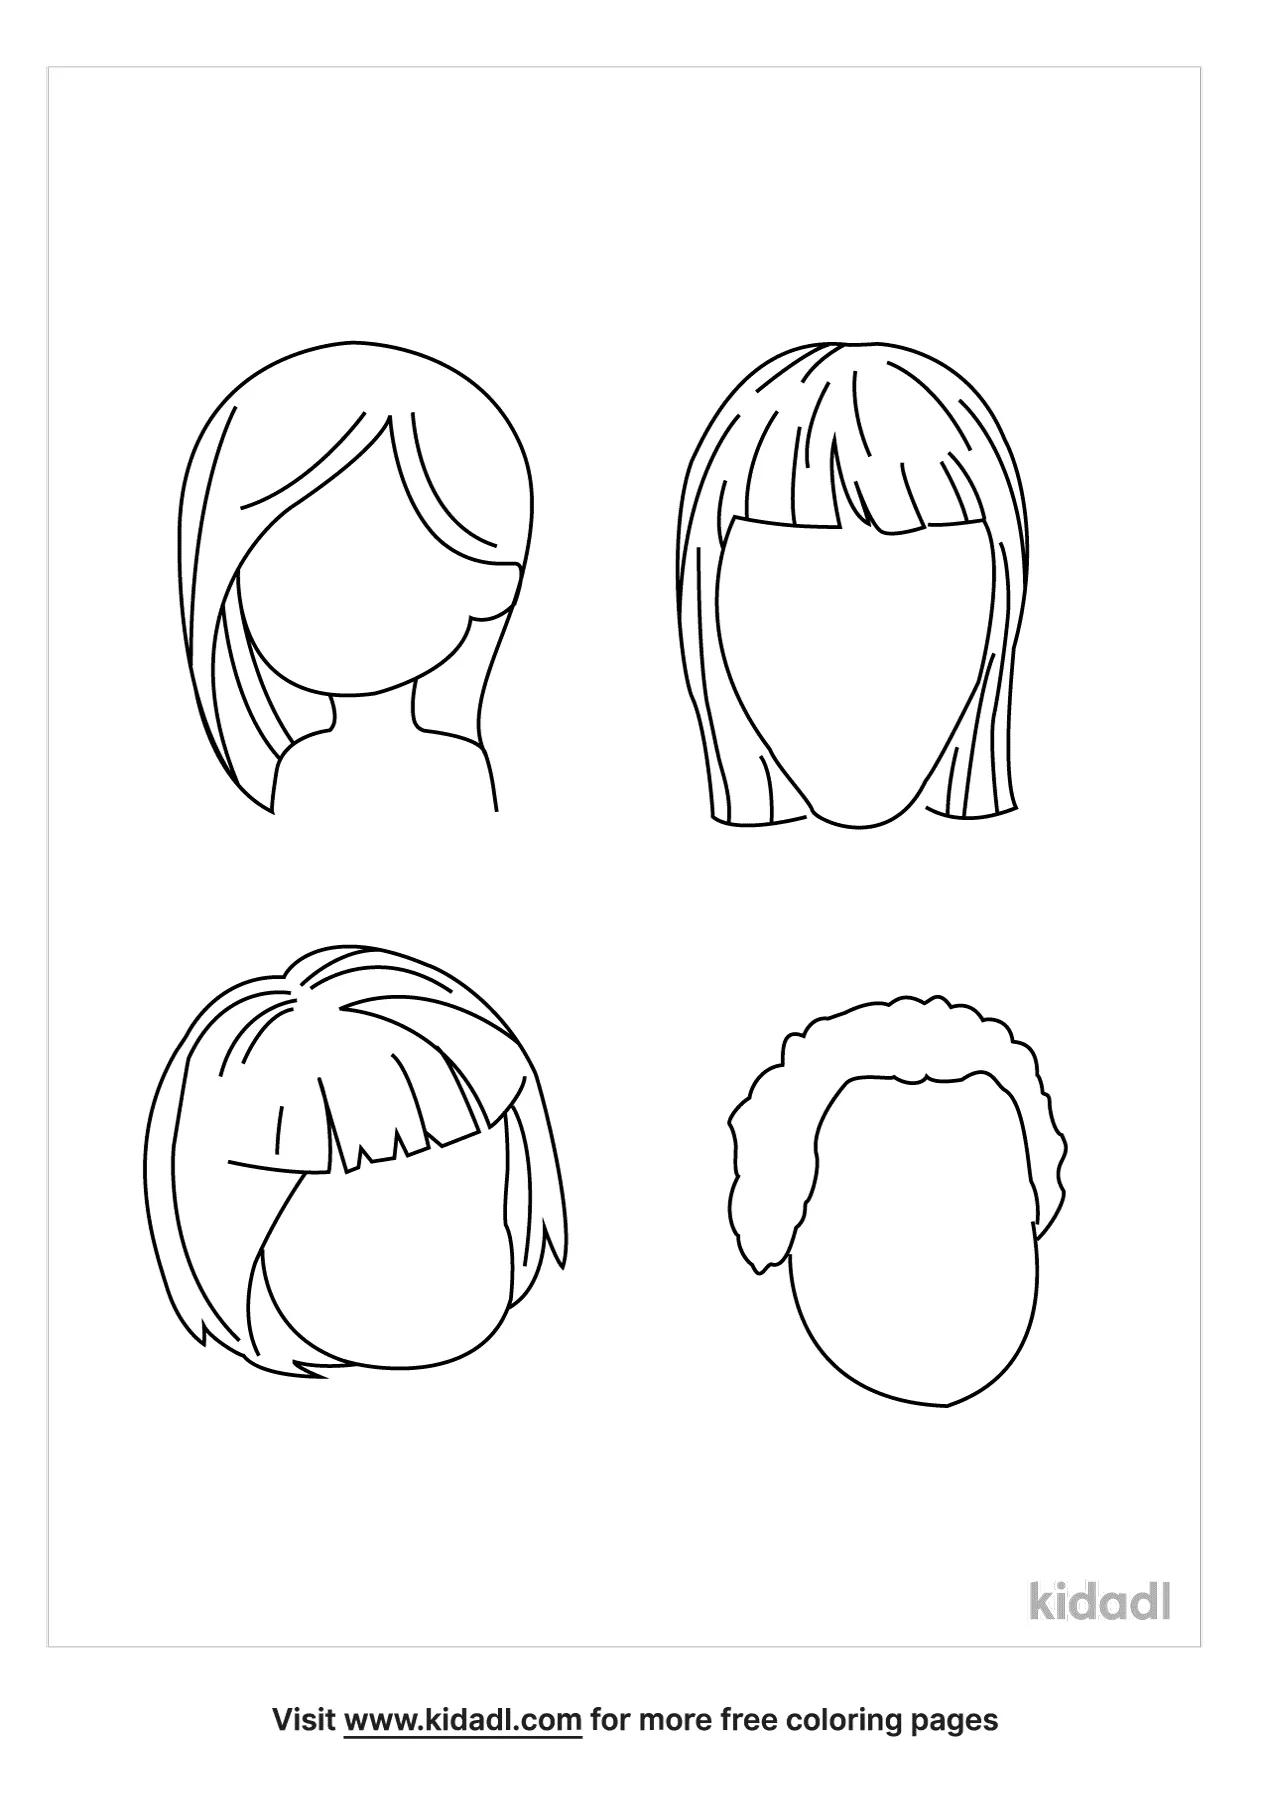 Women's Hairstyles Coloring Page